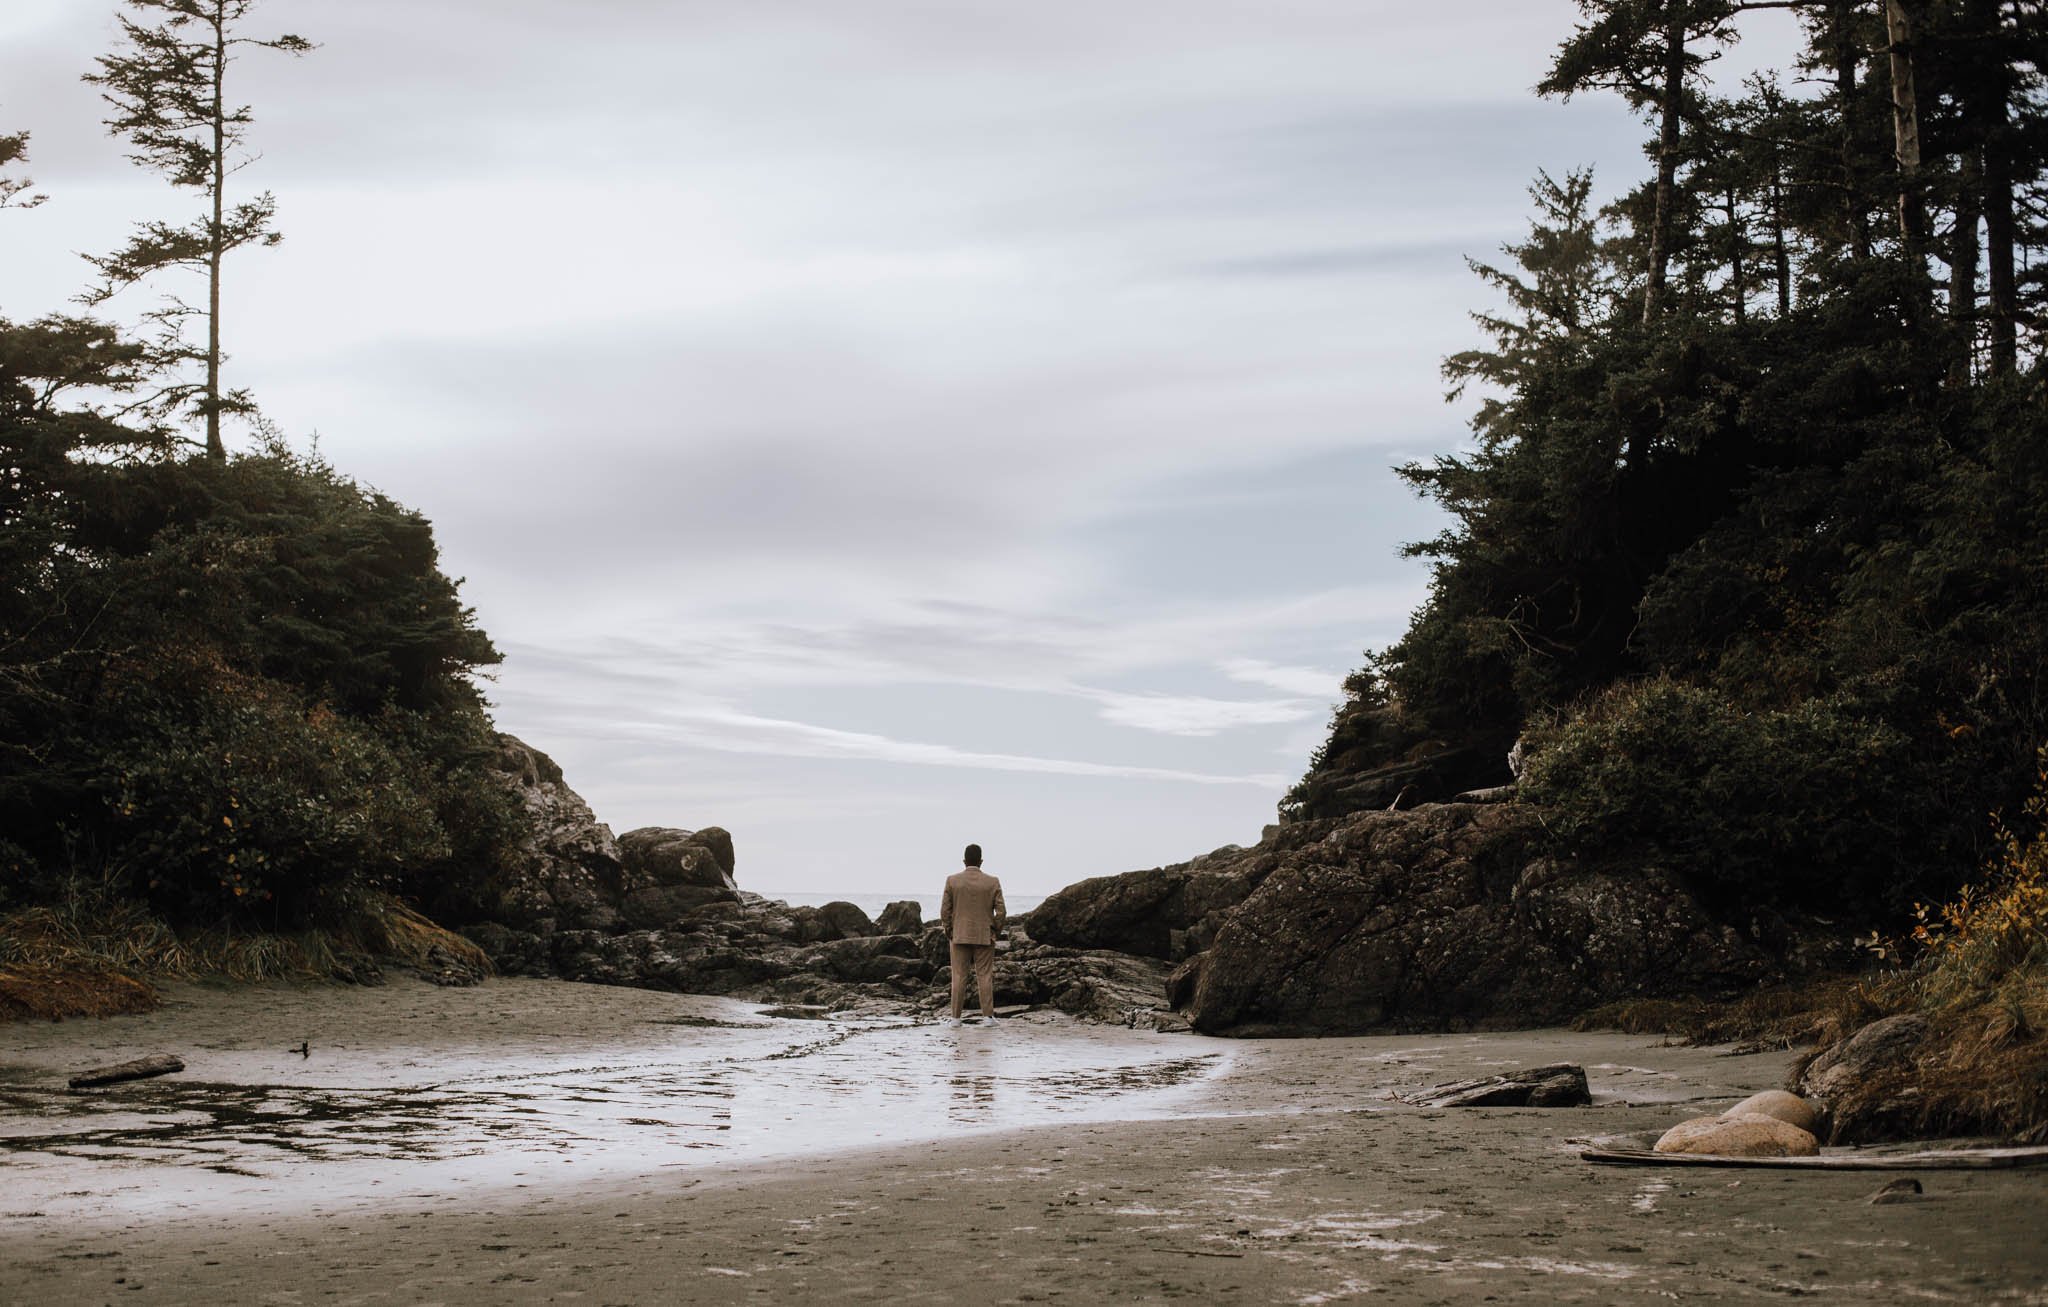 Sabreen and PJ Elopement - Tofino Vancouver Island British Columbia - Elyse Anna Photography - Vancouver Island Elopement-0326.jpg